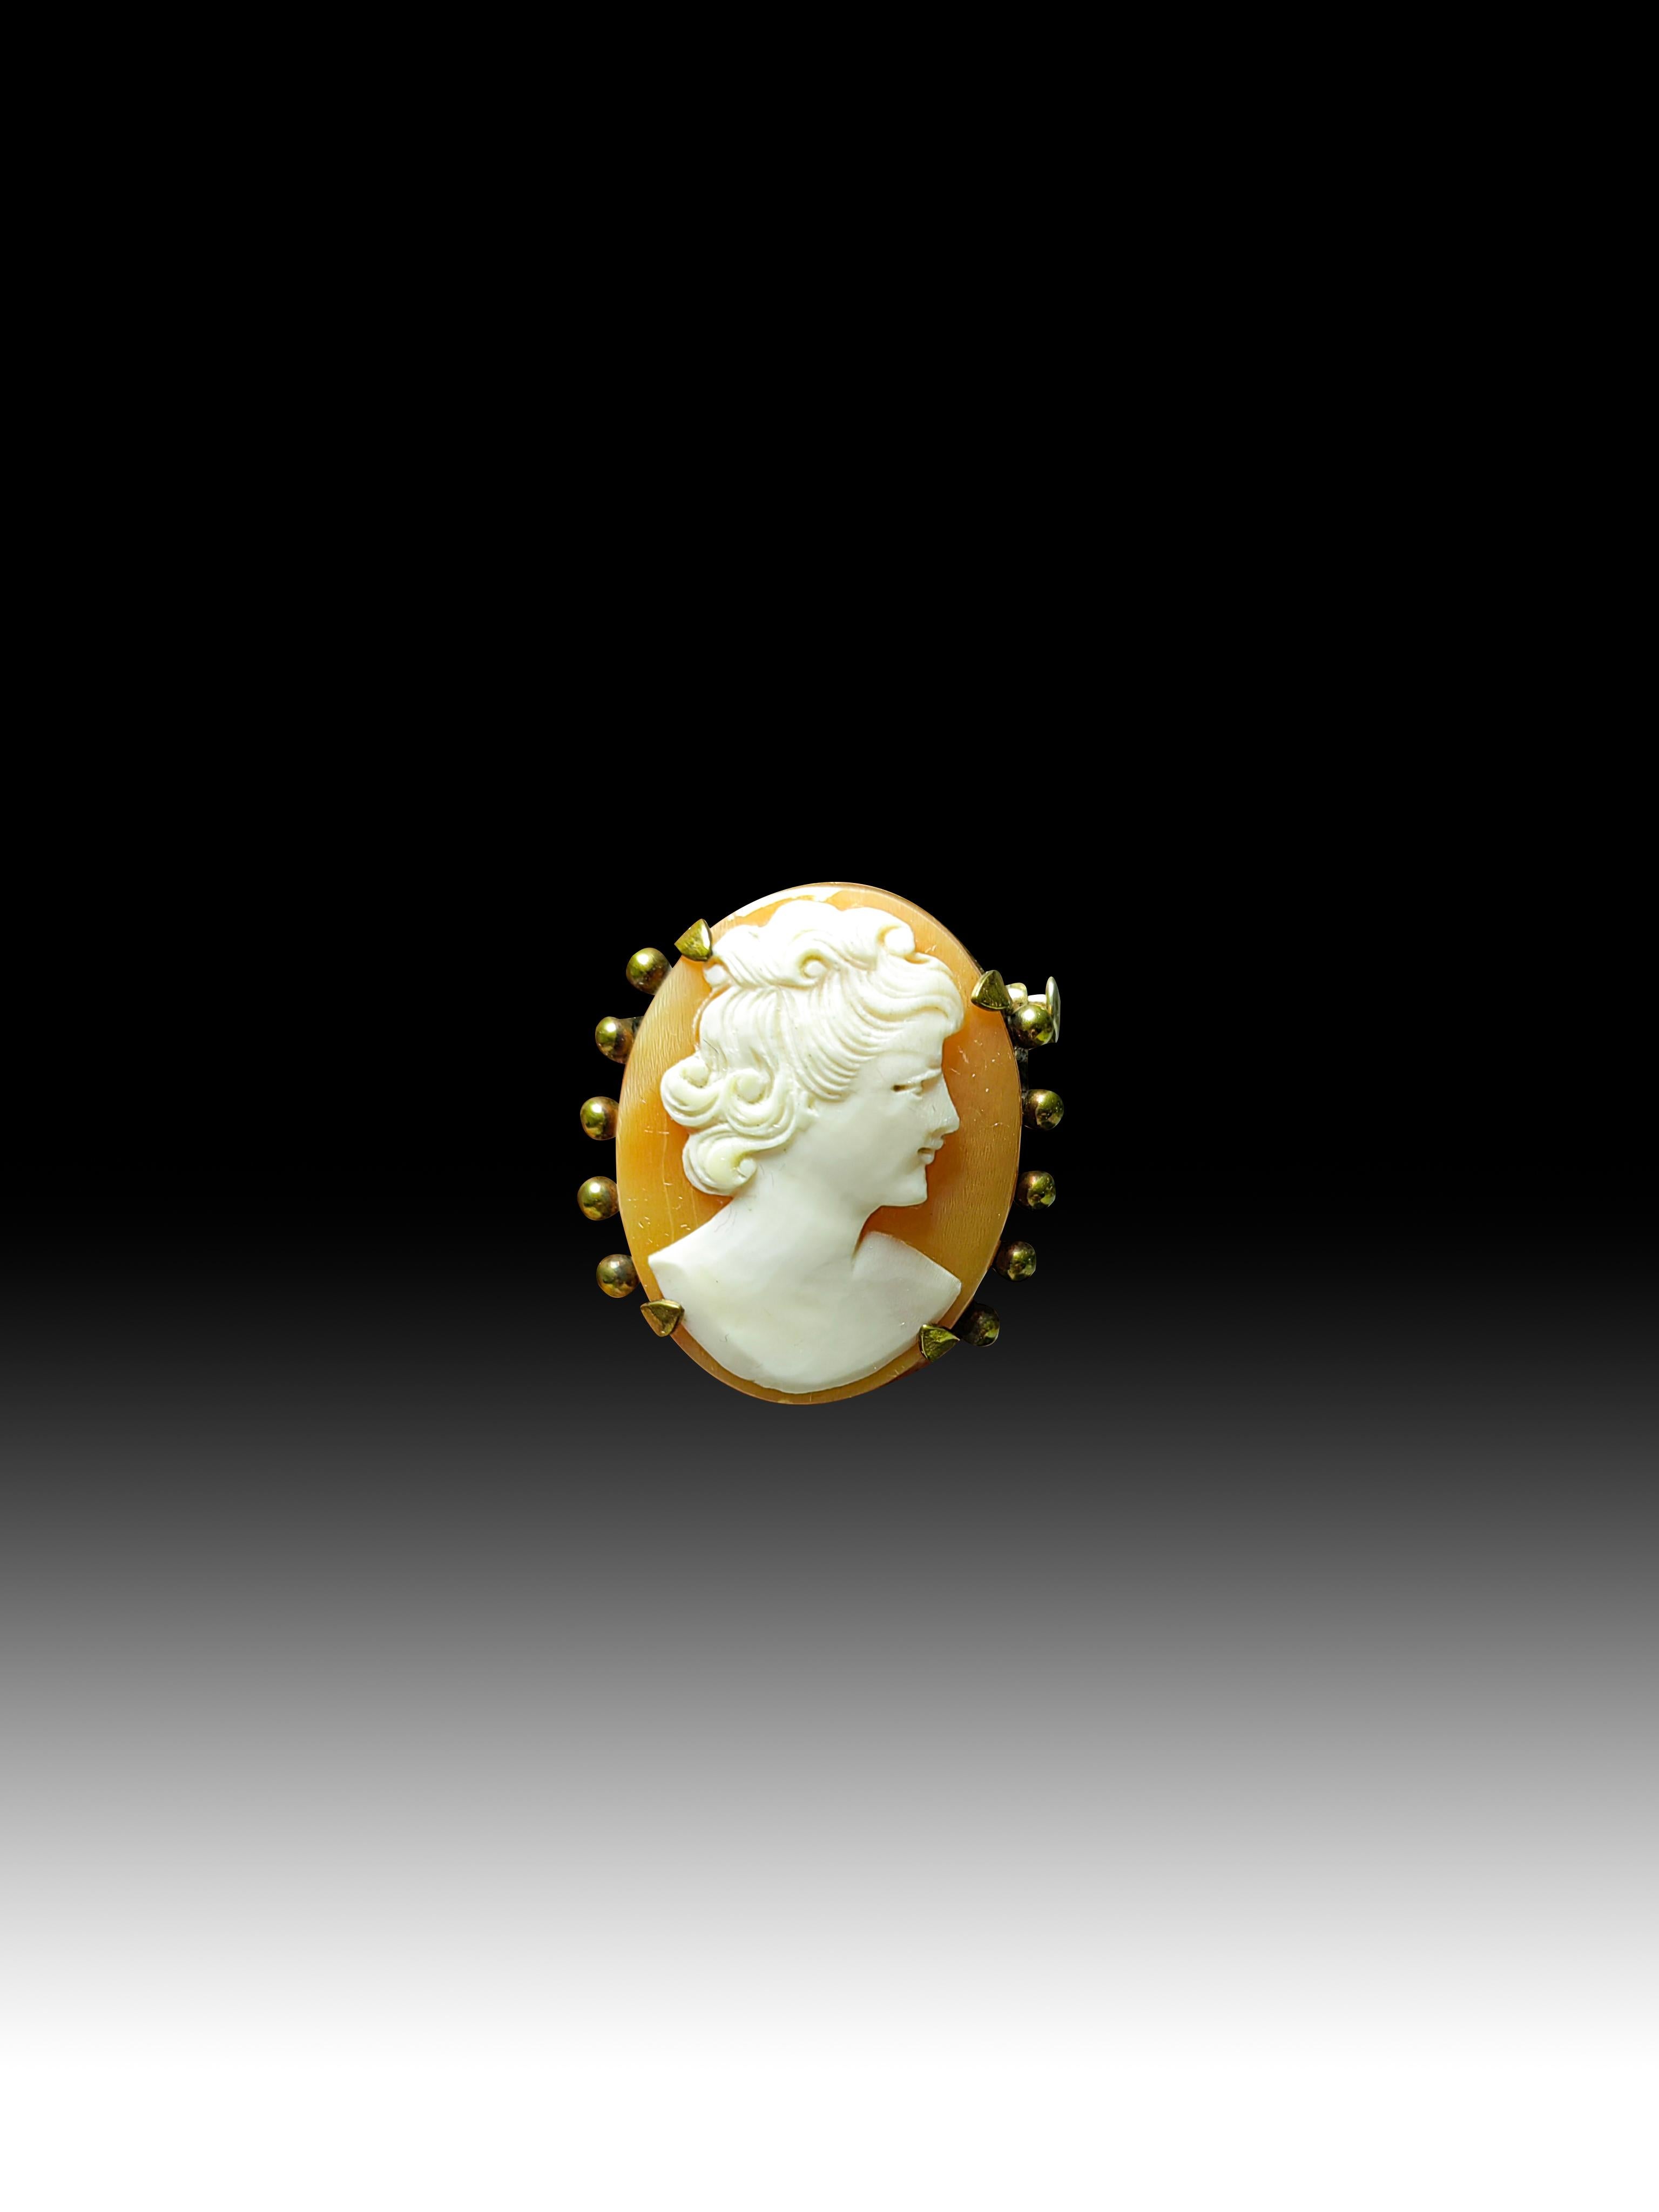 1920s Cameo
Elegant cameo from the 1920s carved in a shell and decorated with gilded brass.Dimensions:2,5x2x0.5 cm